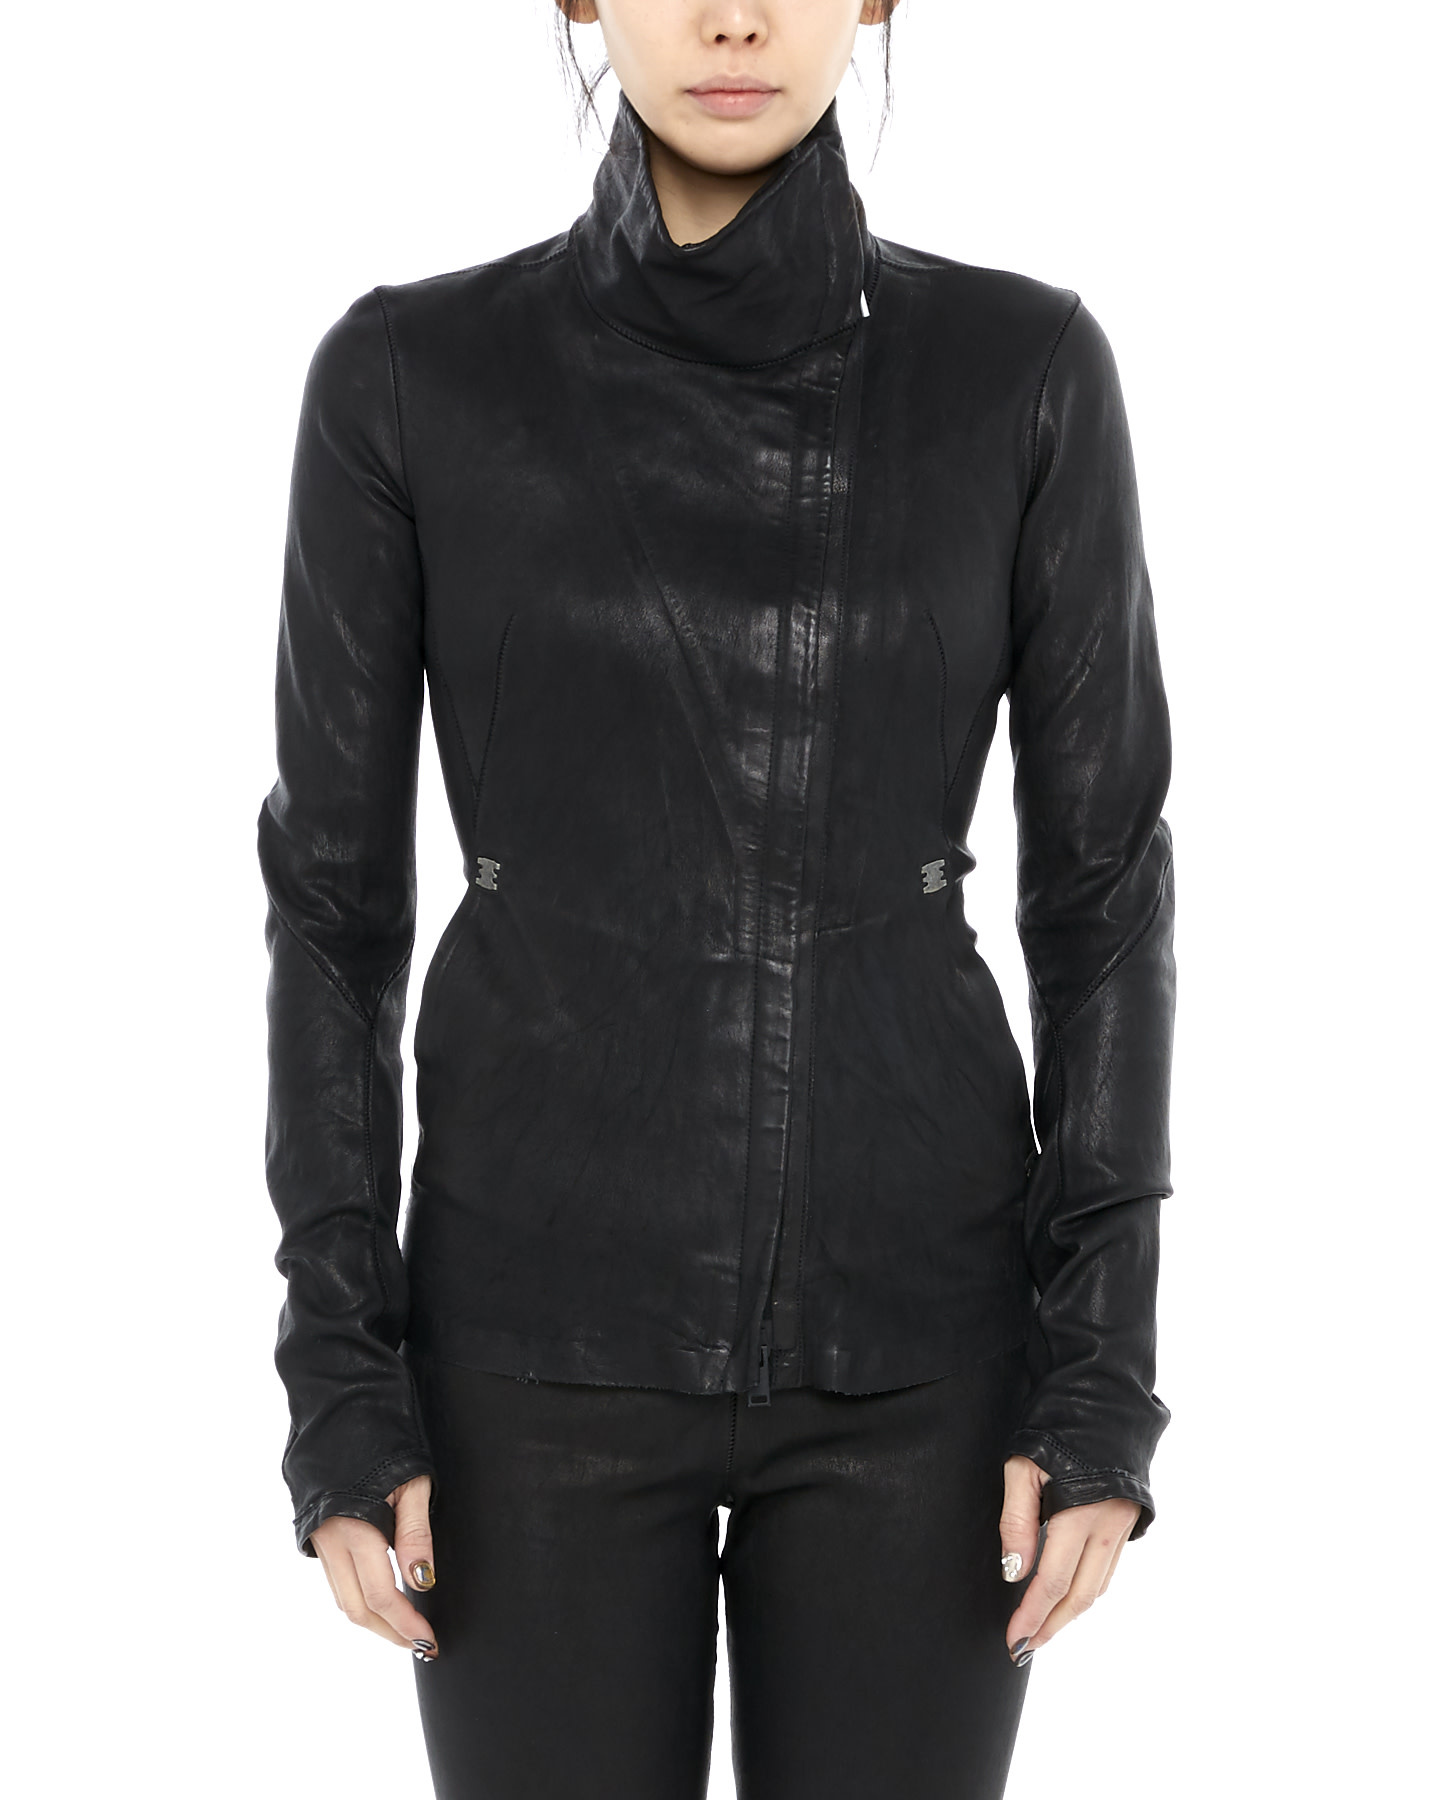 PRUDENTE FITTED STRETCH LEATHER ASYMMETRIC JACKET